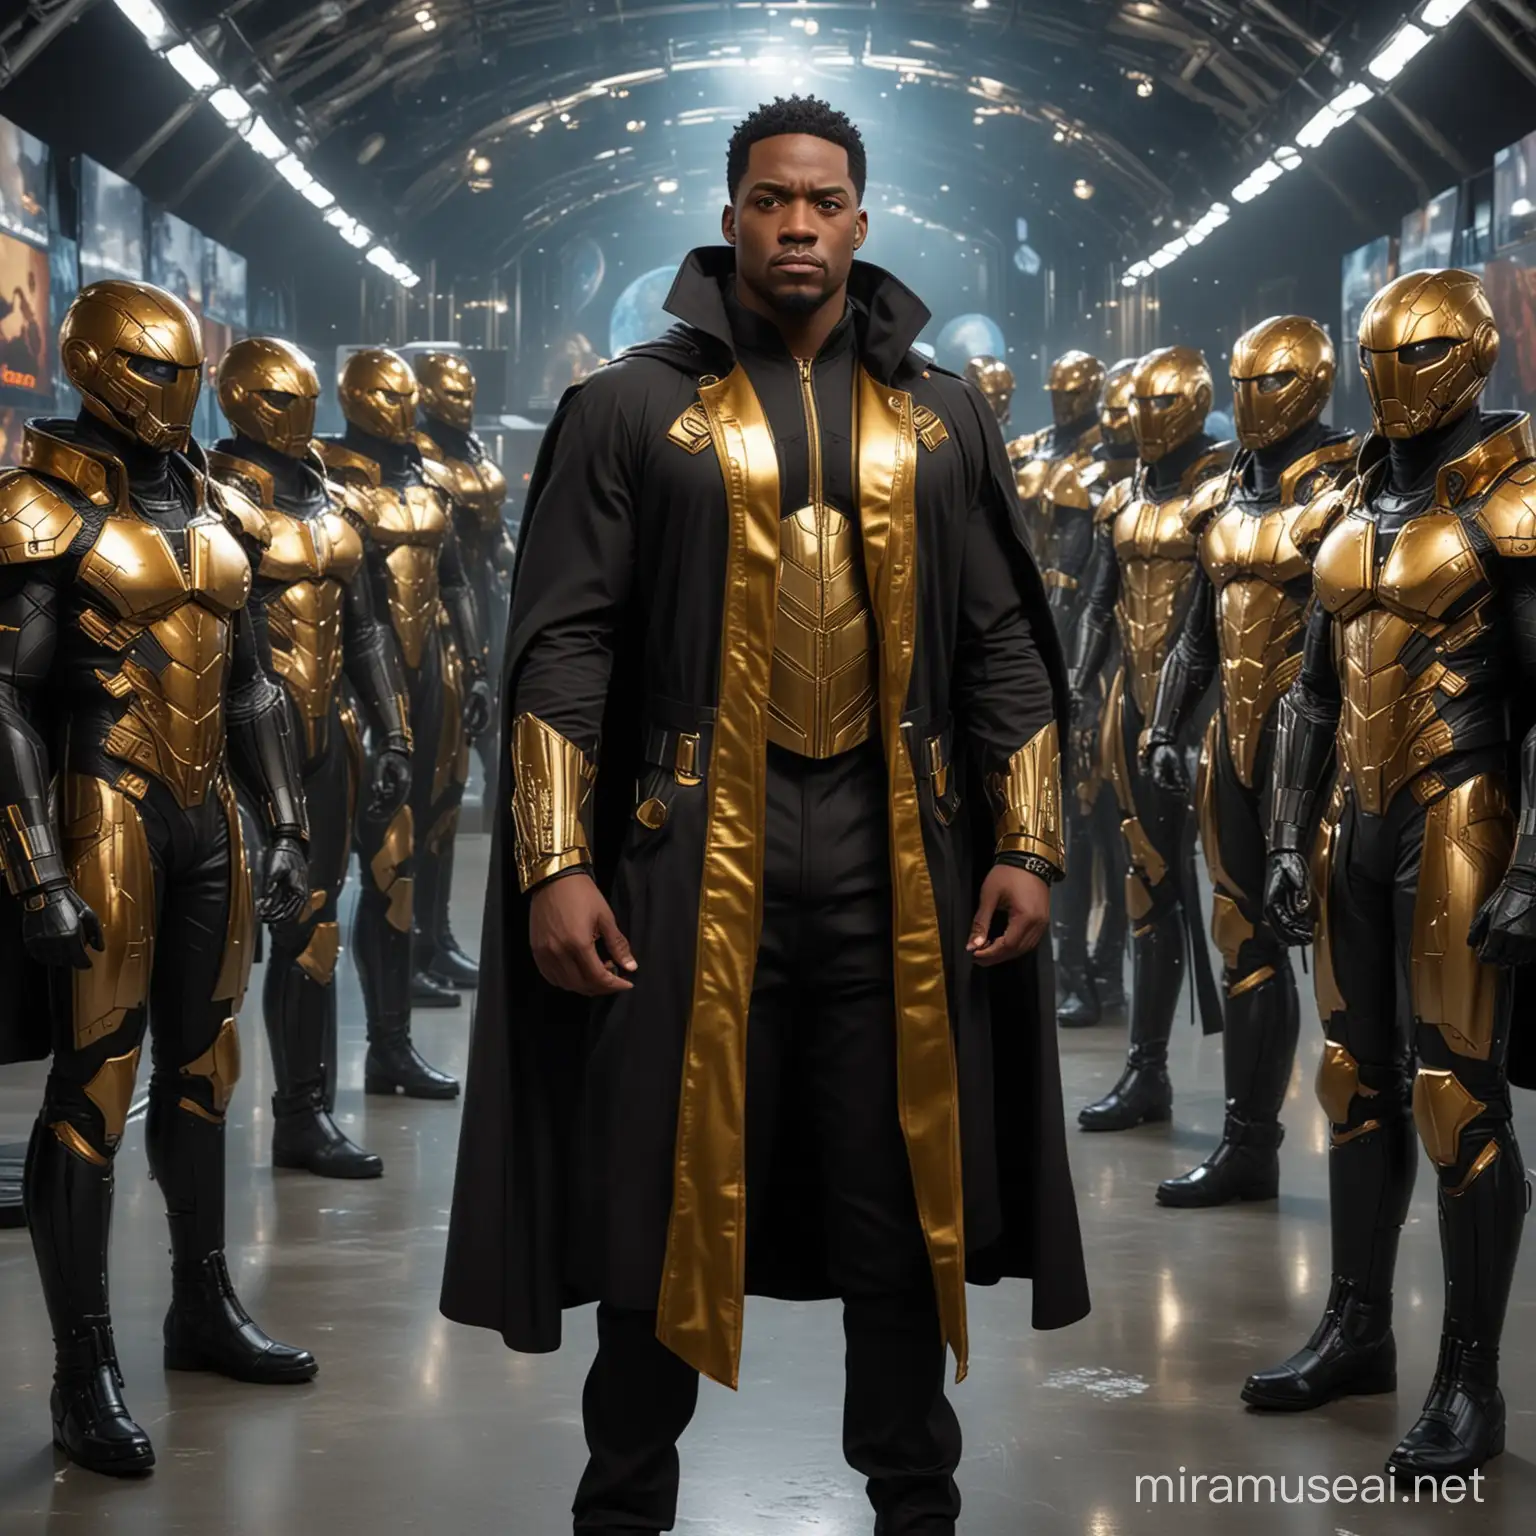 African American film producer Victor Foh Jr as DC Character Nix Uotan, Nix Uotan, highly detailed, 8K, standing in front of multiple copies of the planet Earth, wearing a futuristic black trench coat with gold accents, comic accurate costume